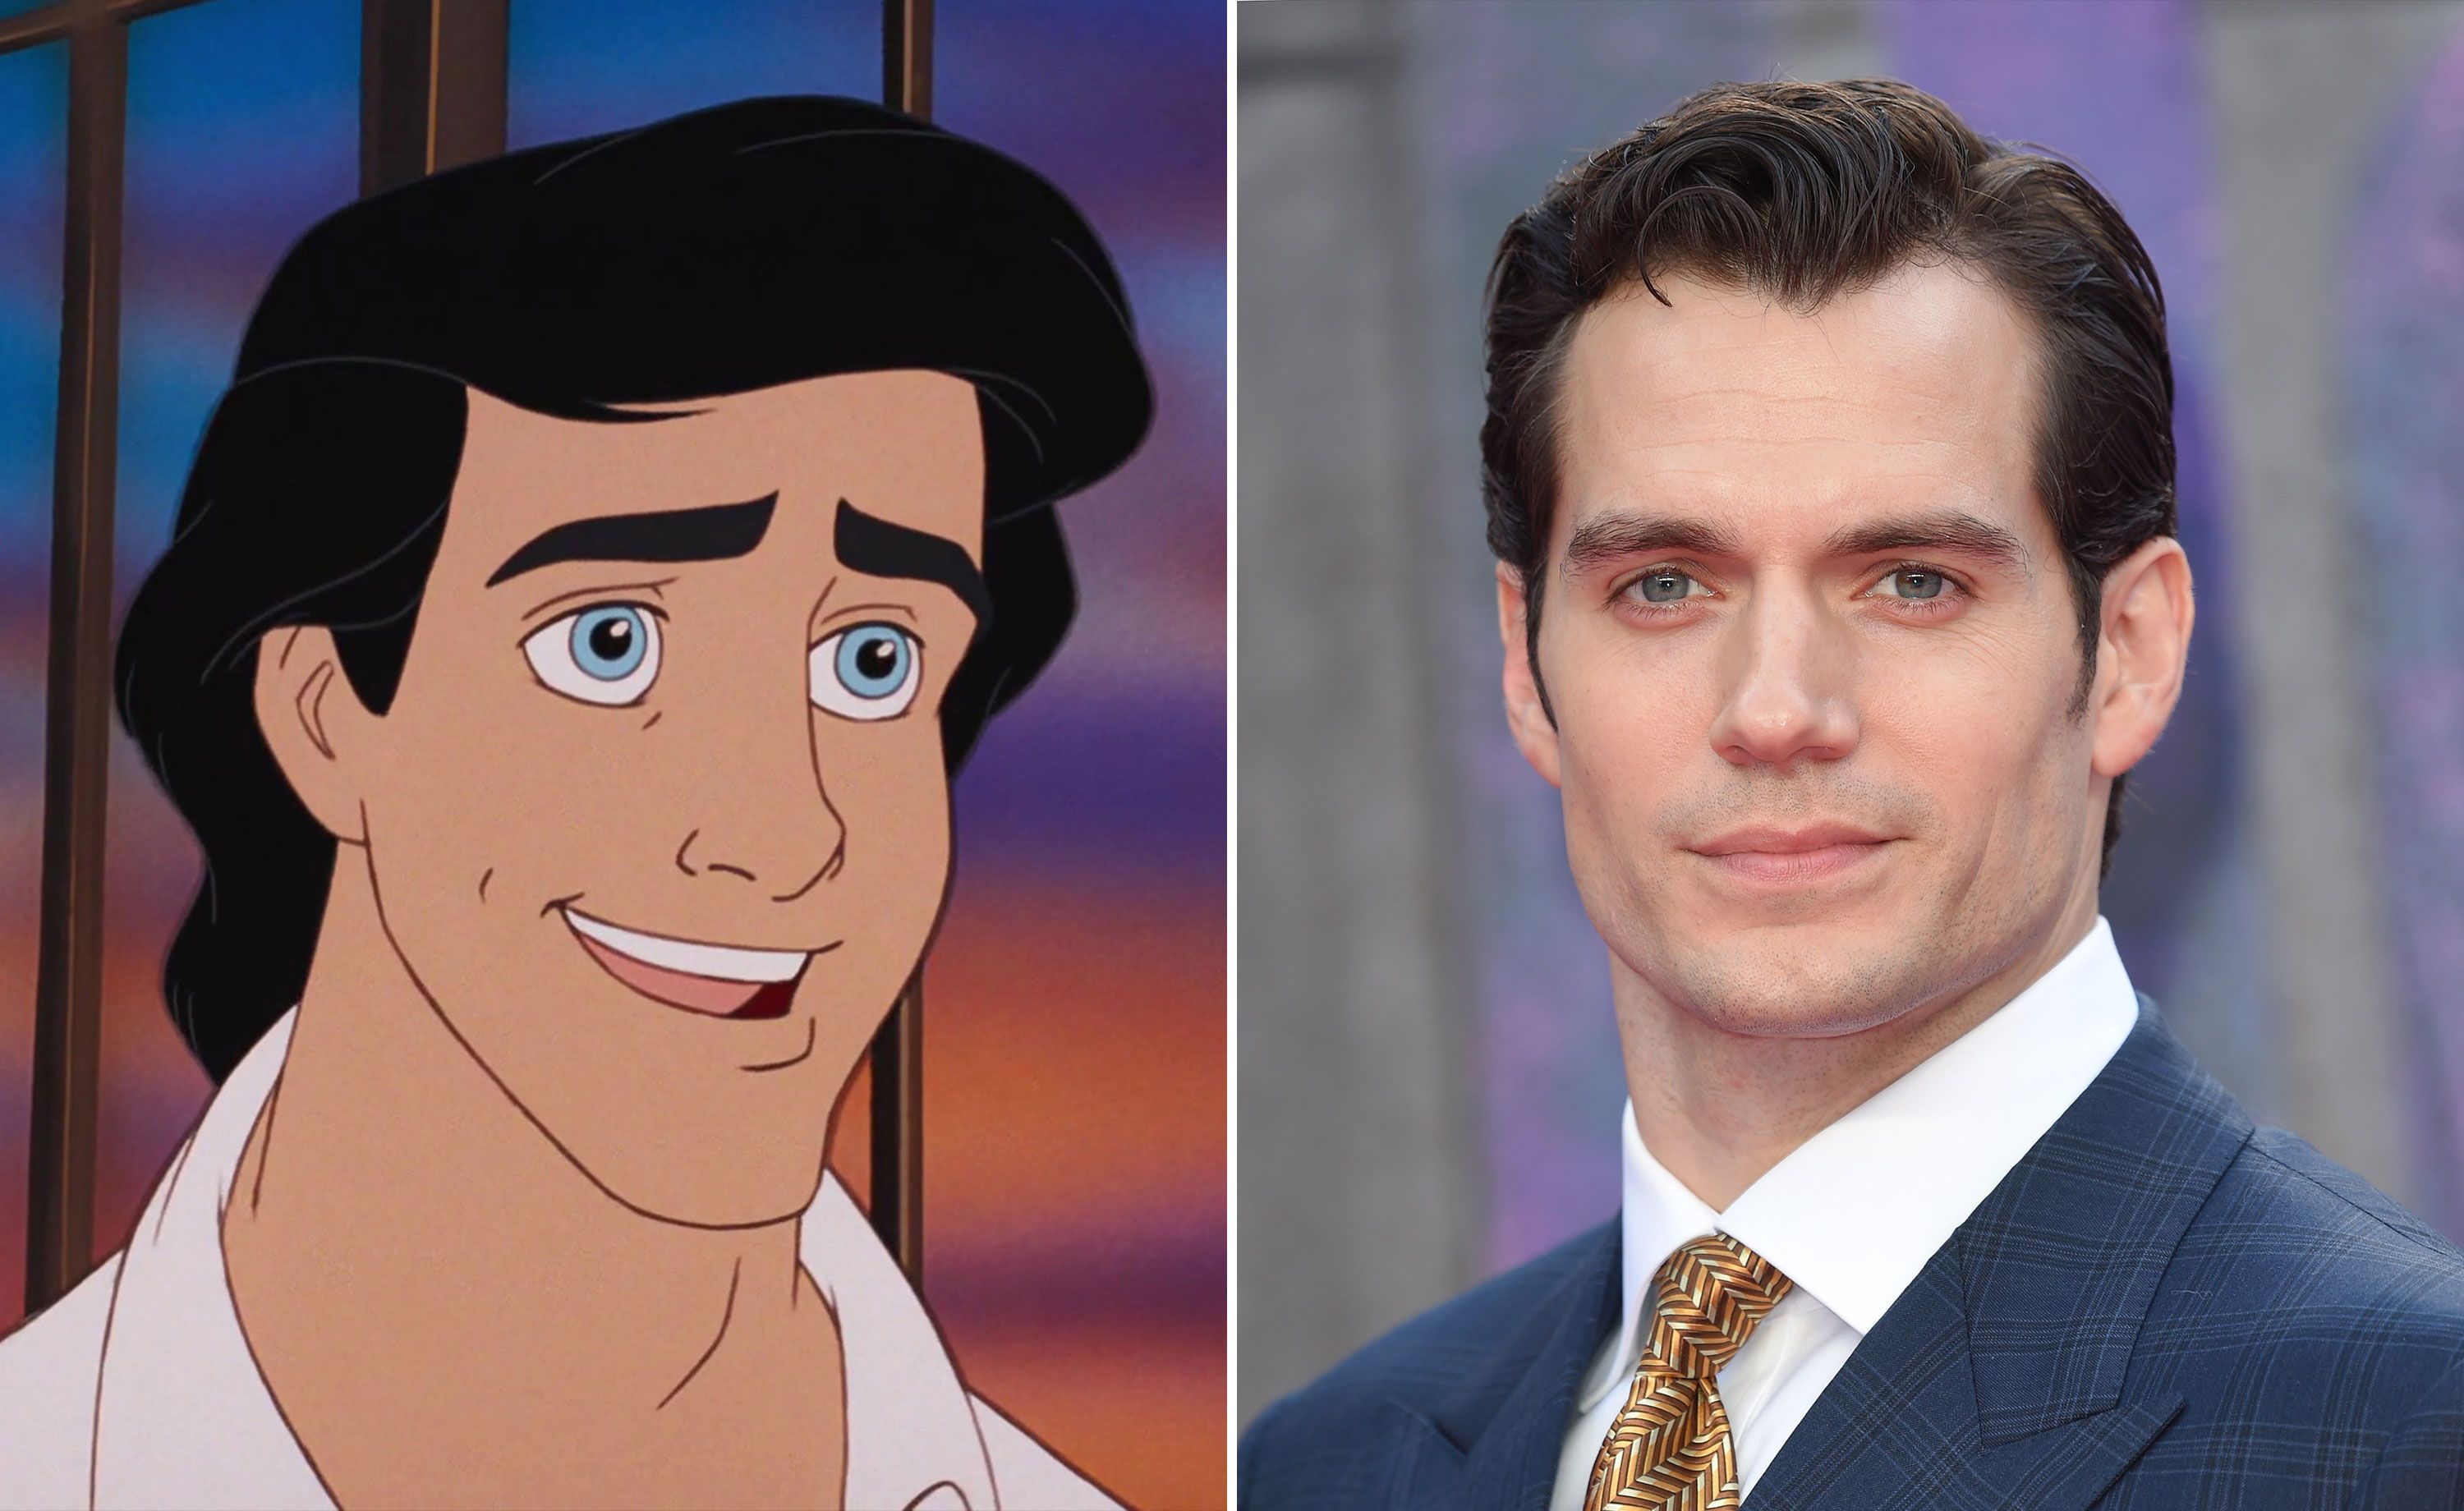 The Live-Action Little Mermaid Movie Has Cast Its Prince Eric